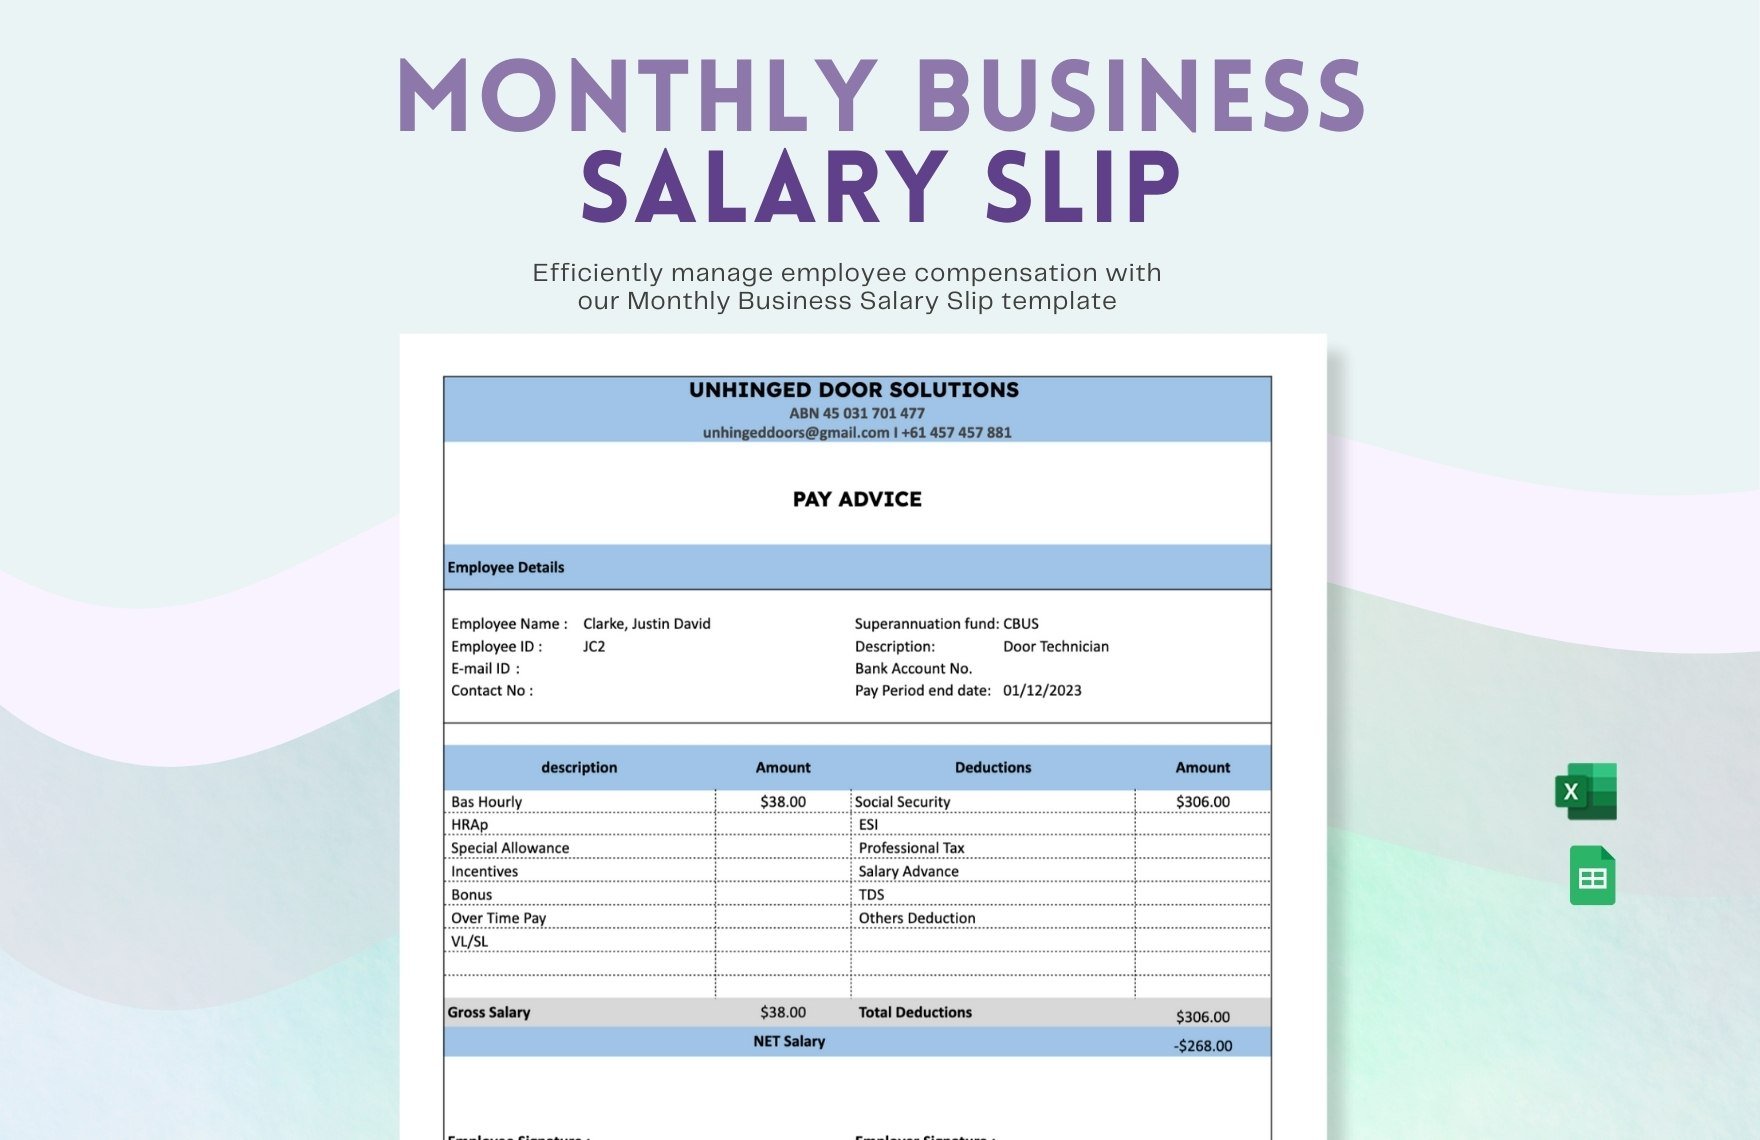 Monthly Business Salary Slip in Excel, Google Sheets